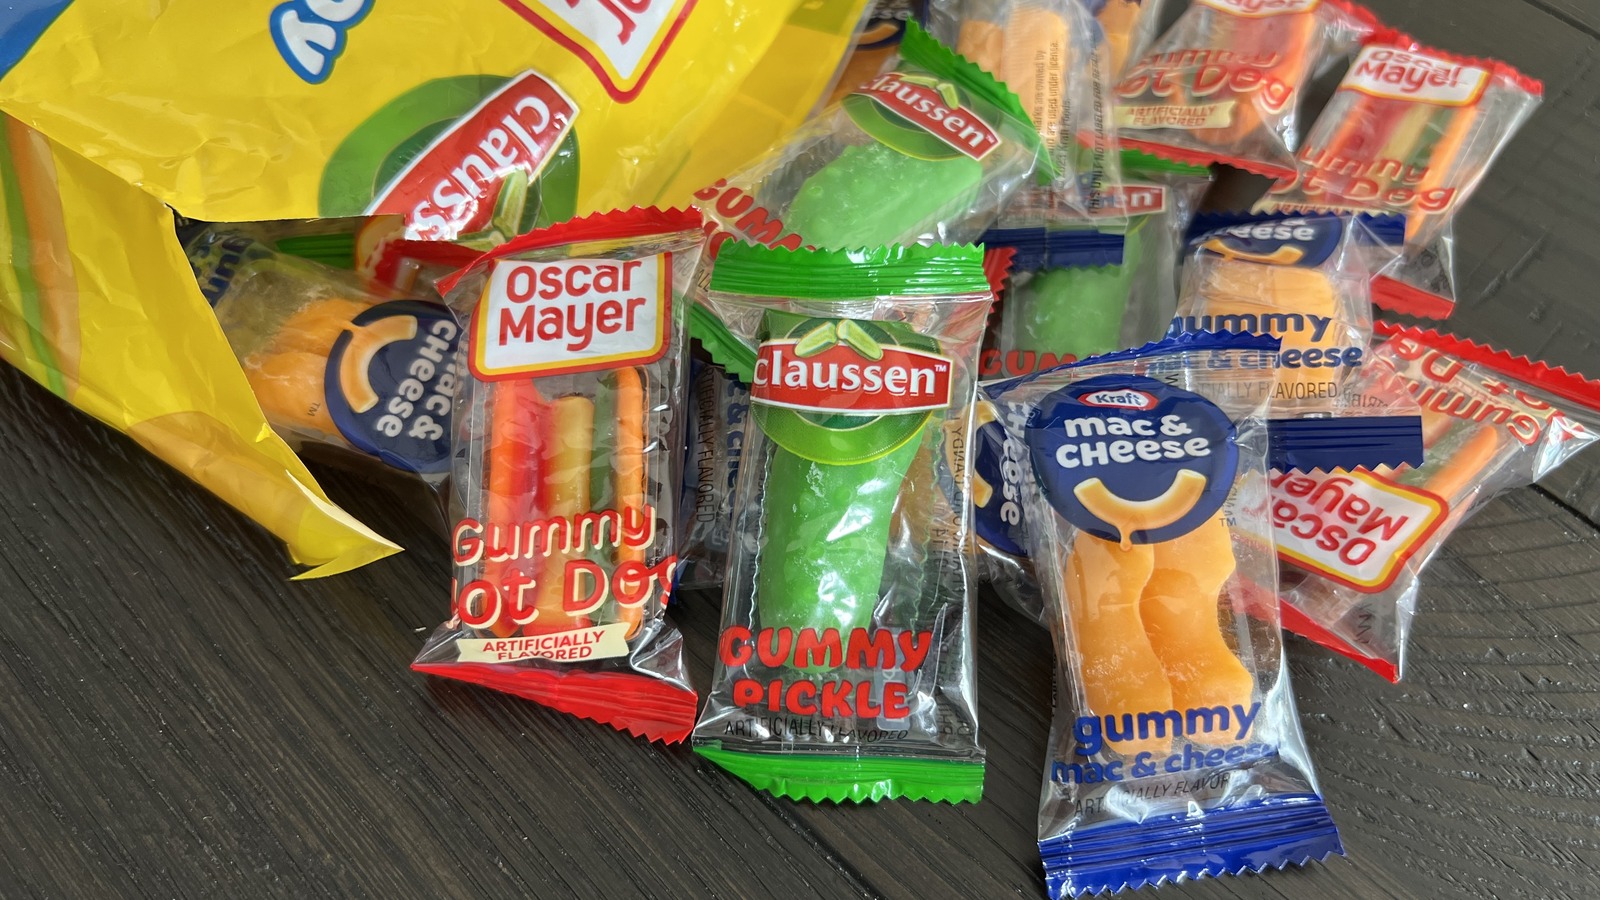 https://www.thedailymeal.com/img/gallery/kraft-heinz-gummy-snack-pack-review-hot-dog-pickle-and-mac-cheese-gummies-for-the-win/l-intro-1695042772.jpg